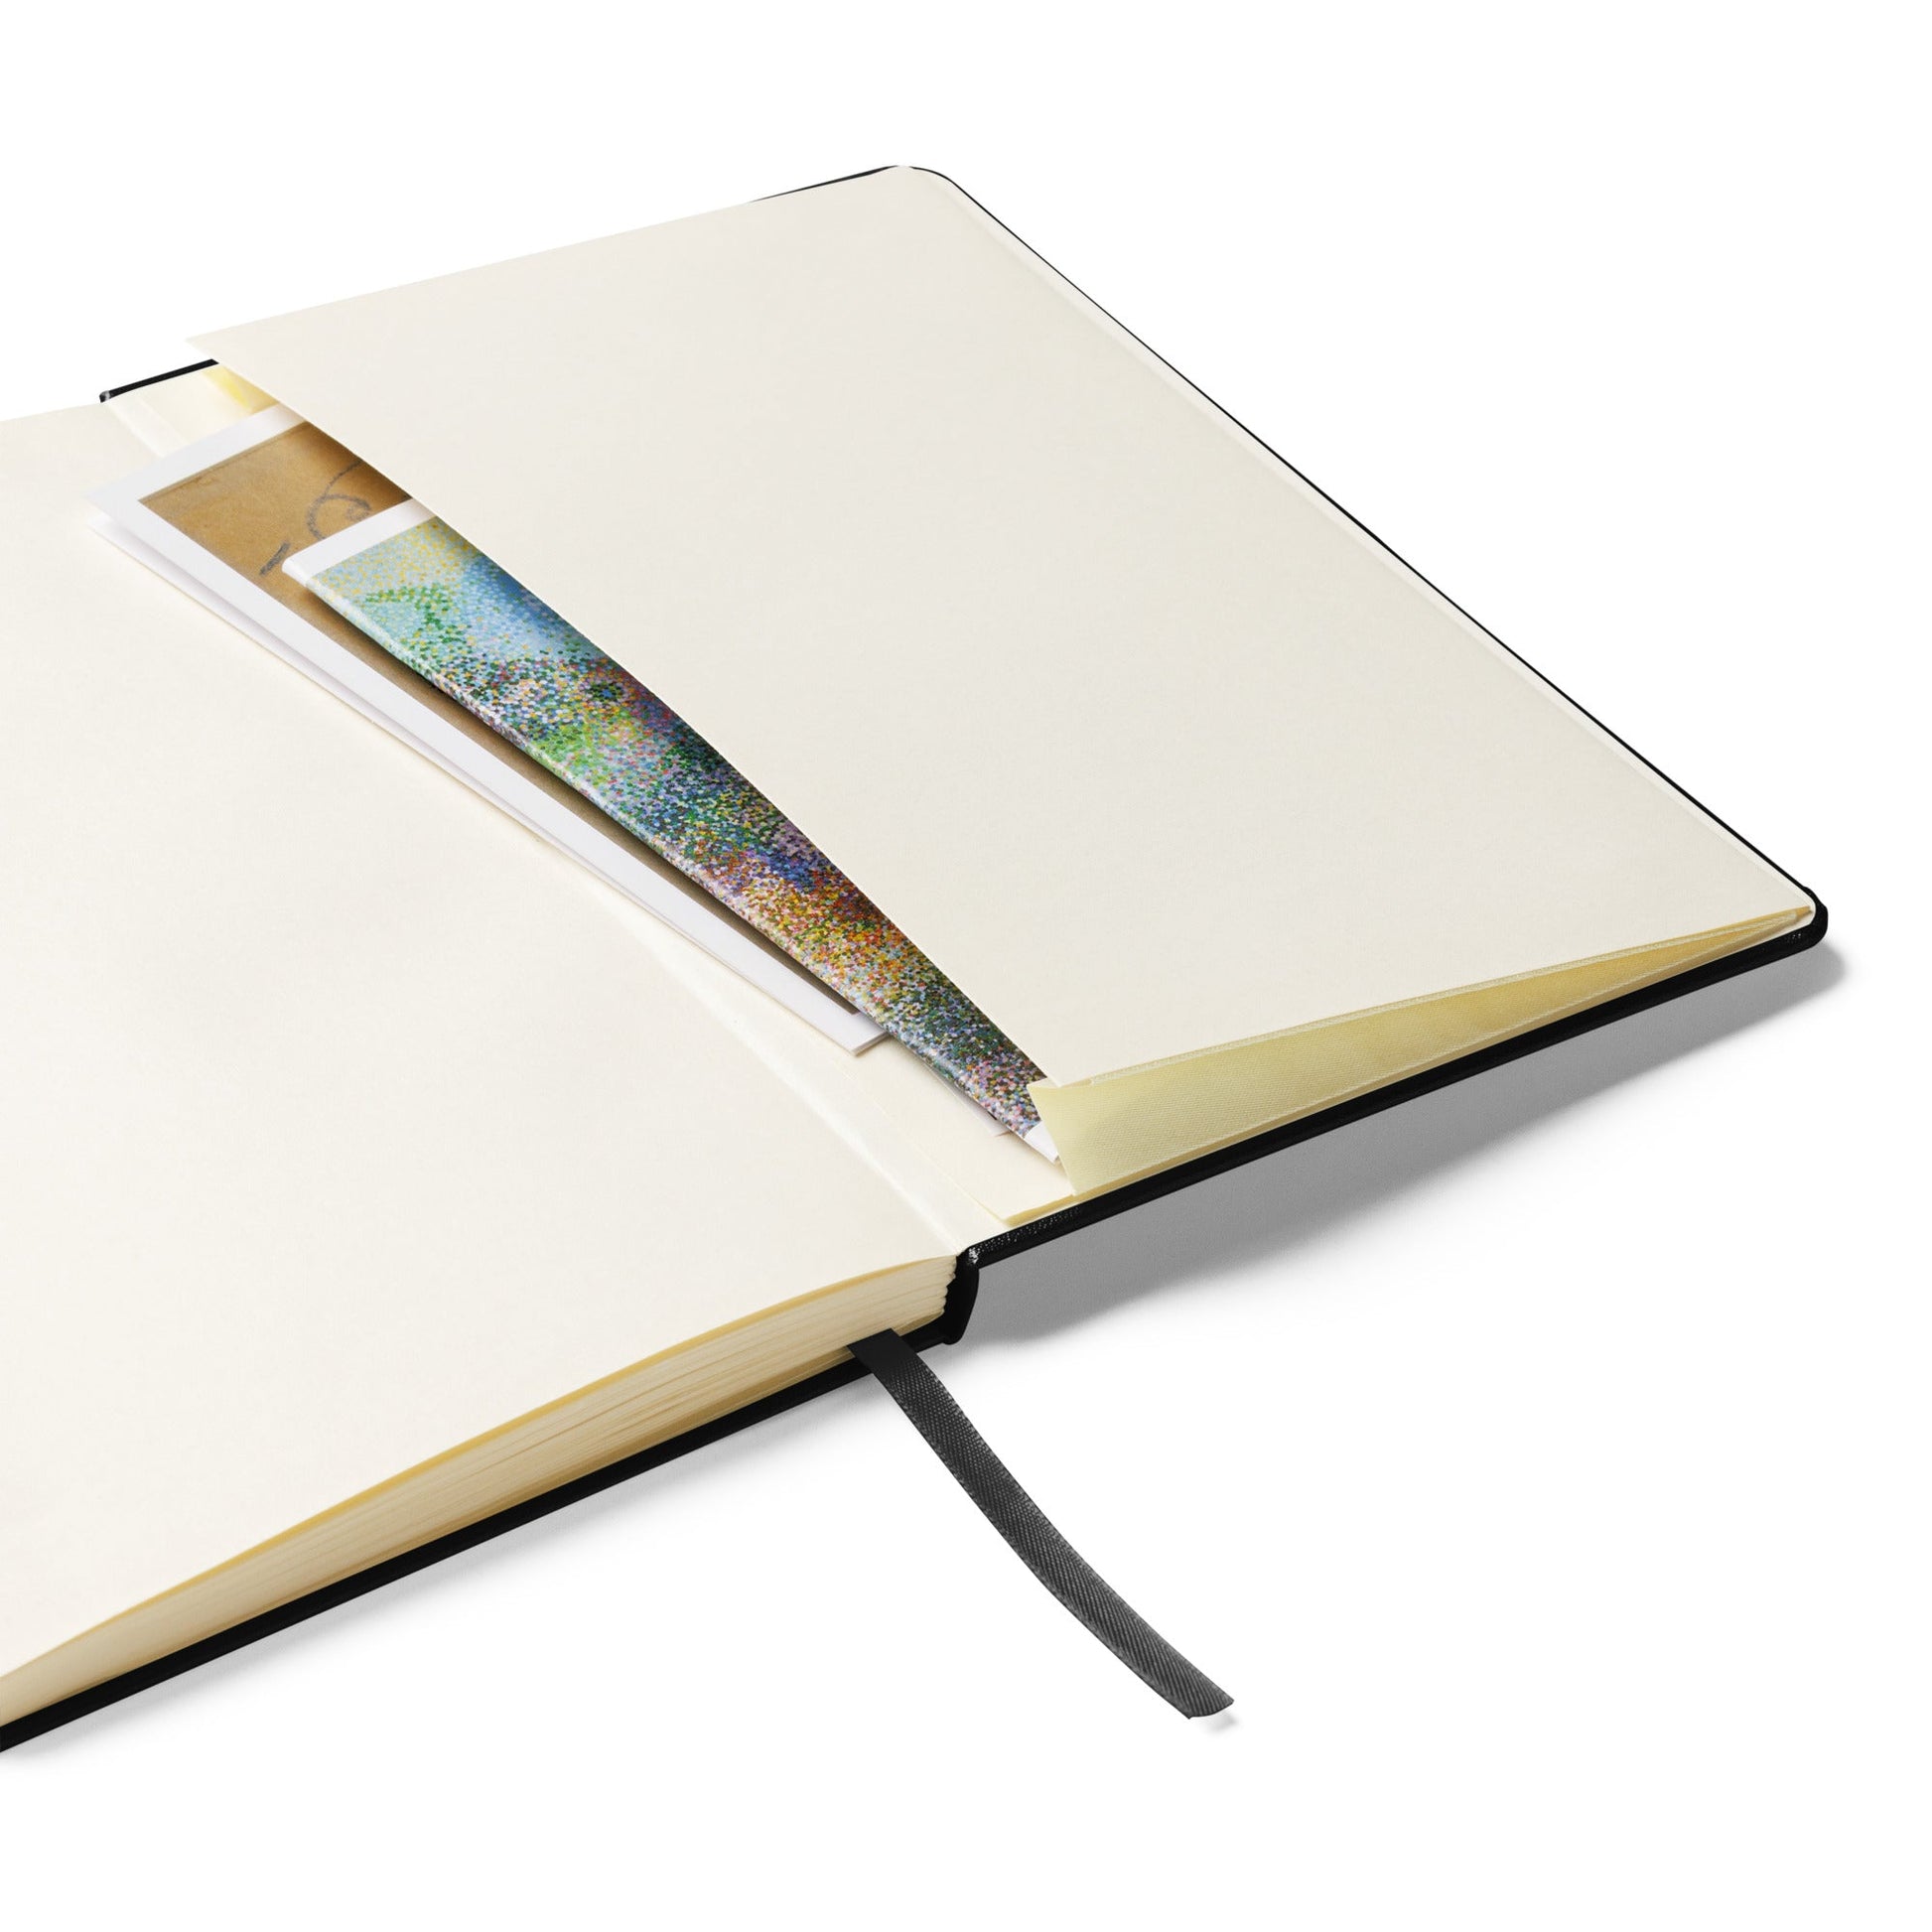 Hardcover bound notebook | The Last Rite | Tattoo - Spectral Ink Shop - Notebooks & Notepads -9489196_16952